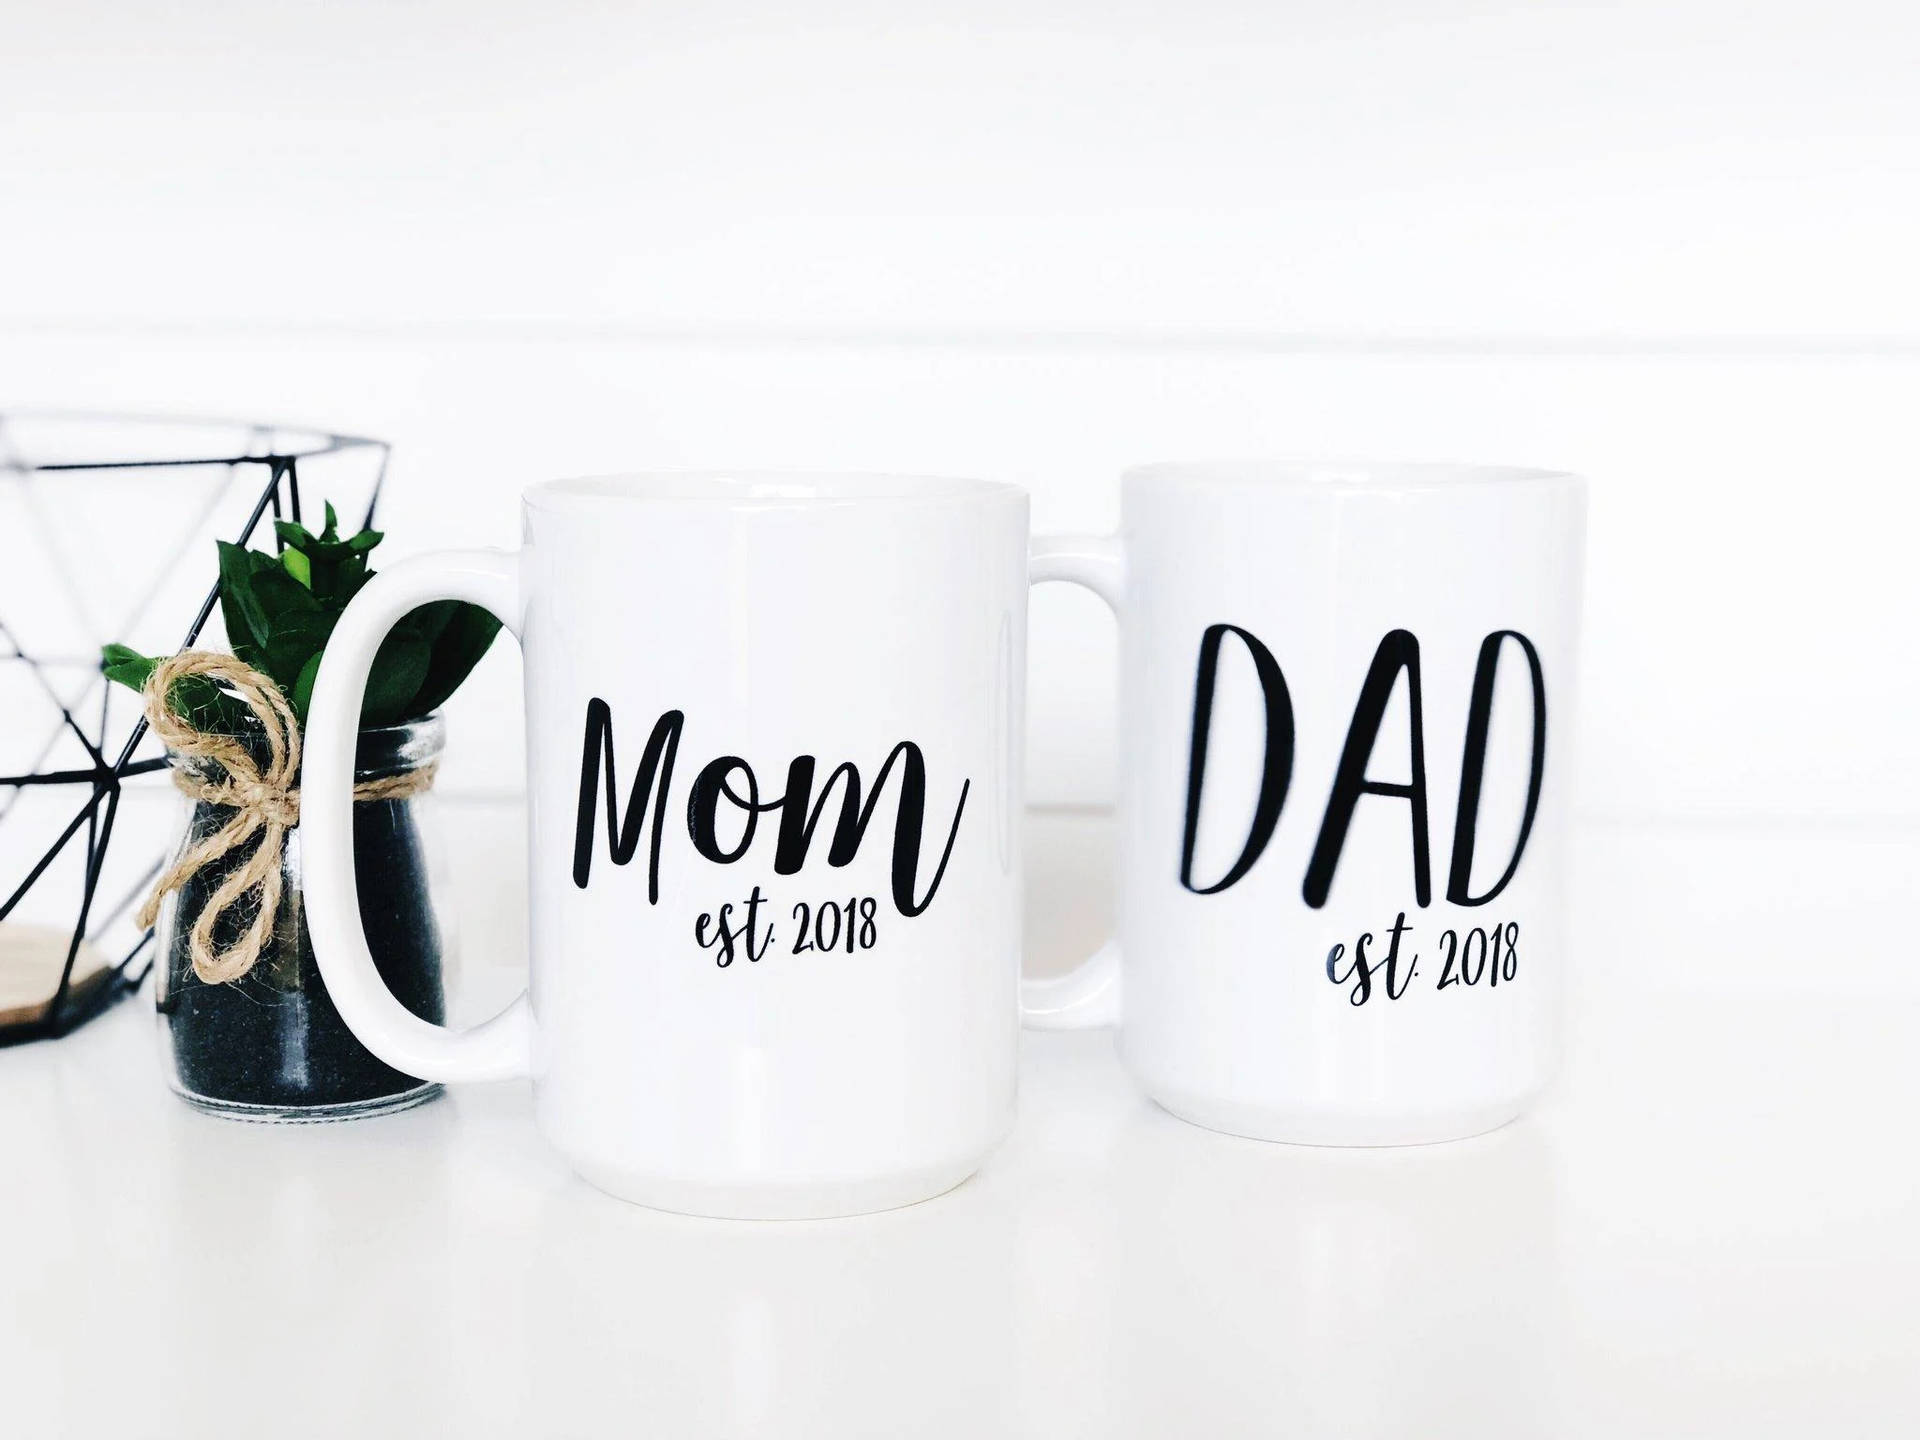 cristina mcdaniel recommends Daddy Mugs Tumblr